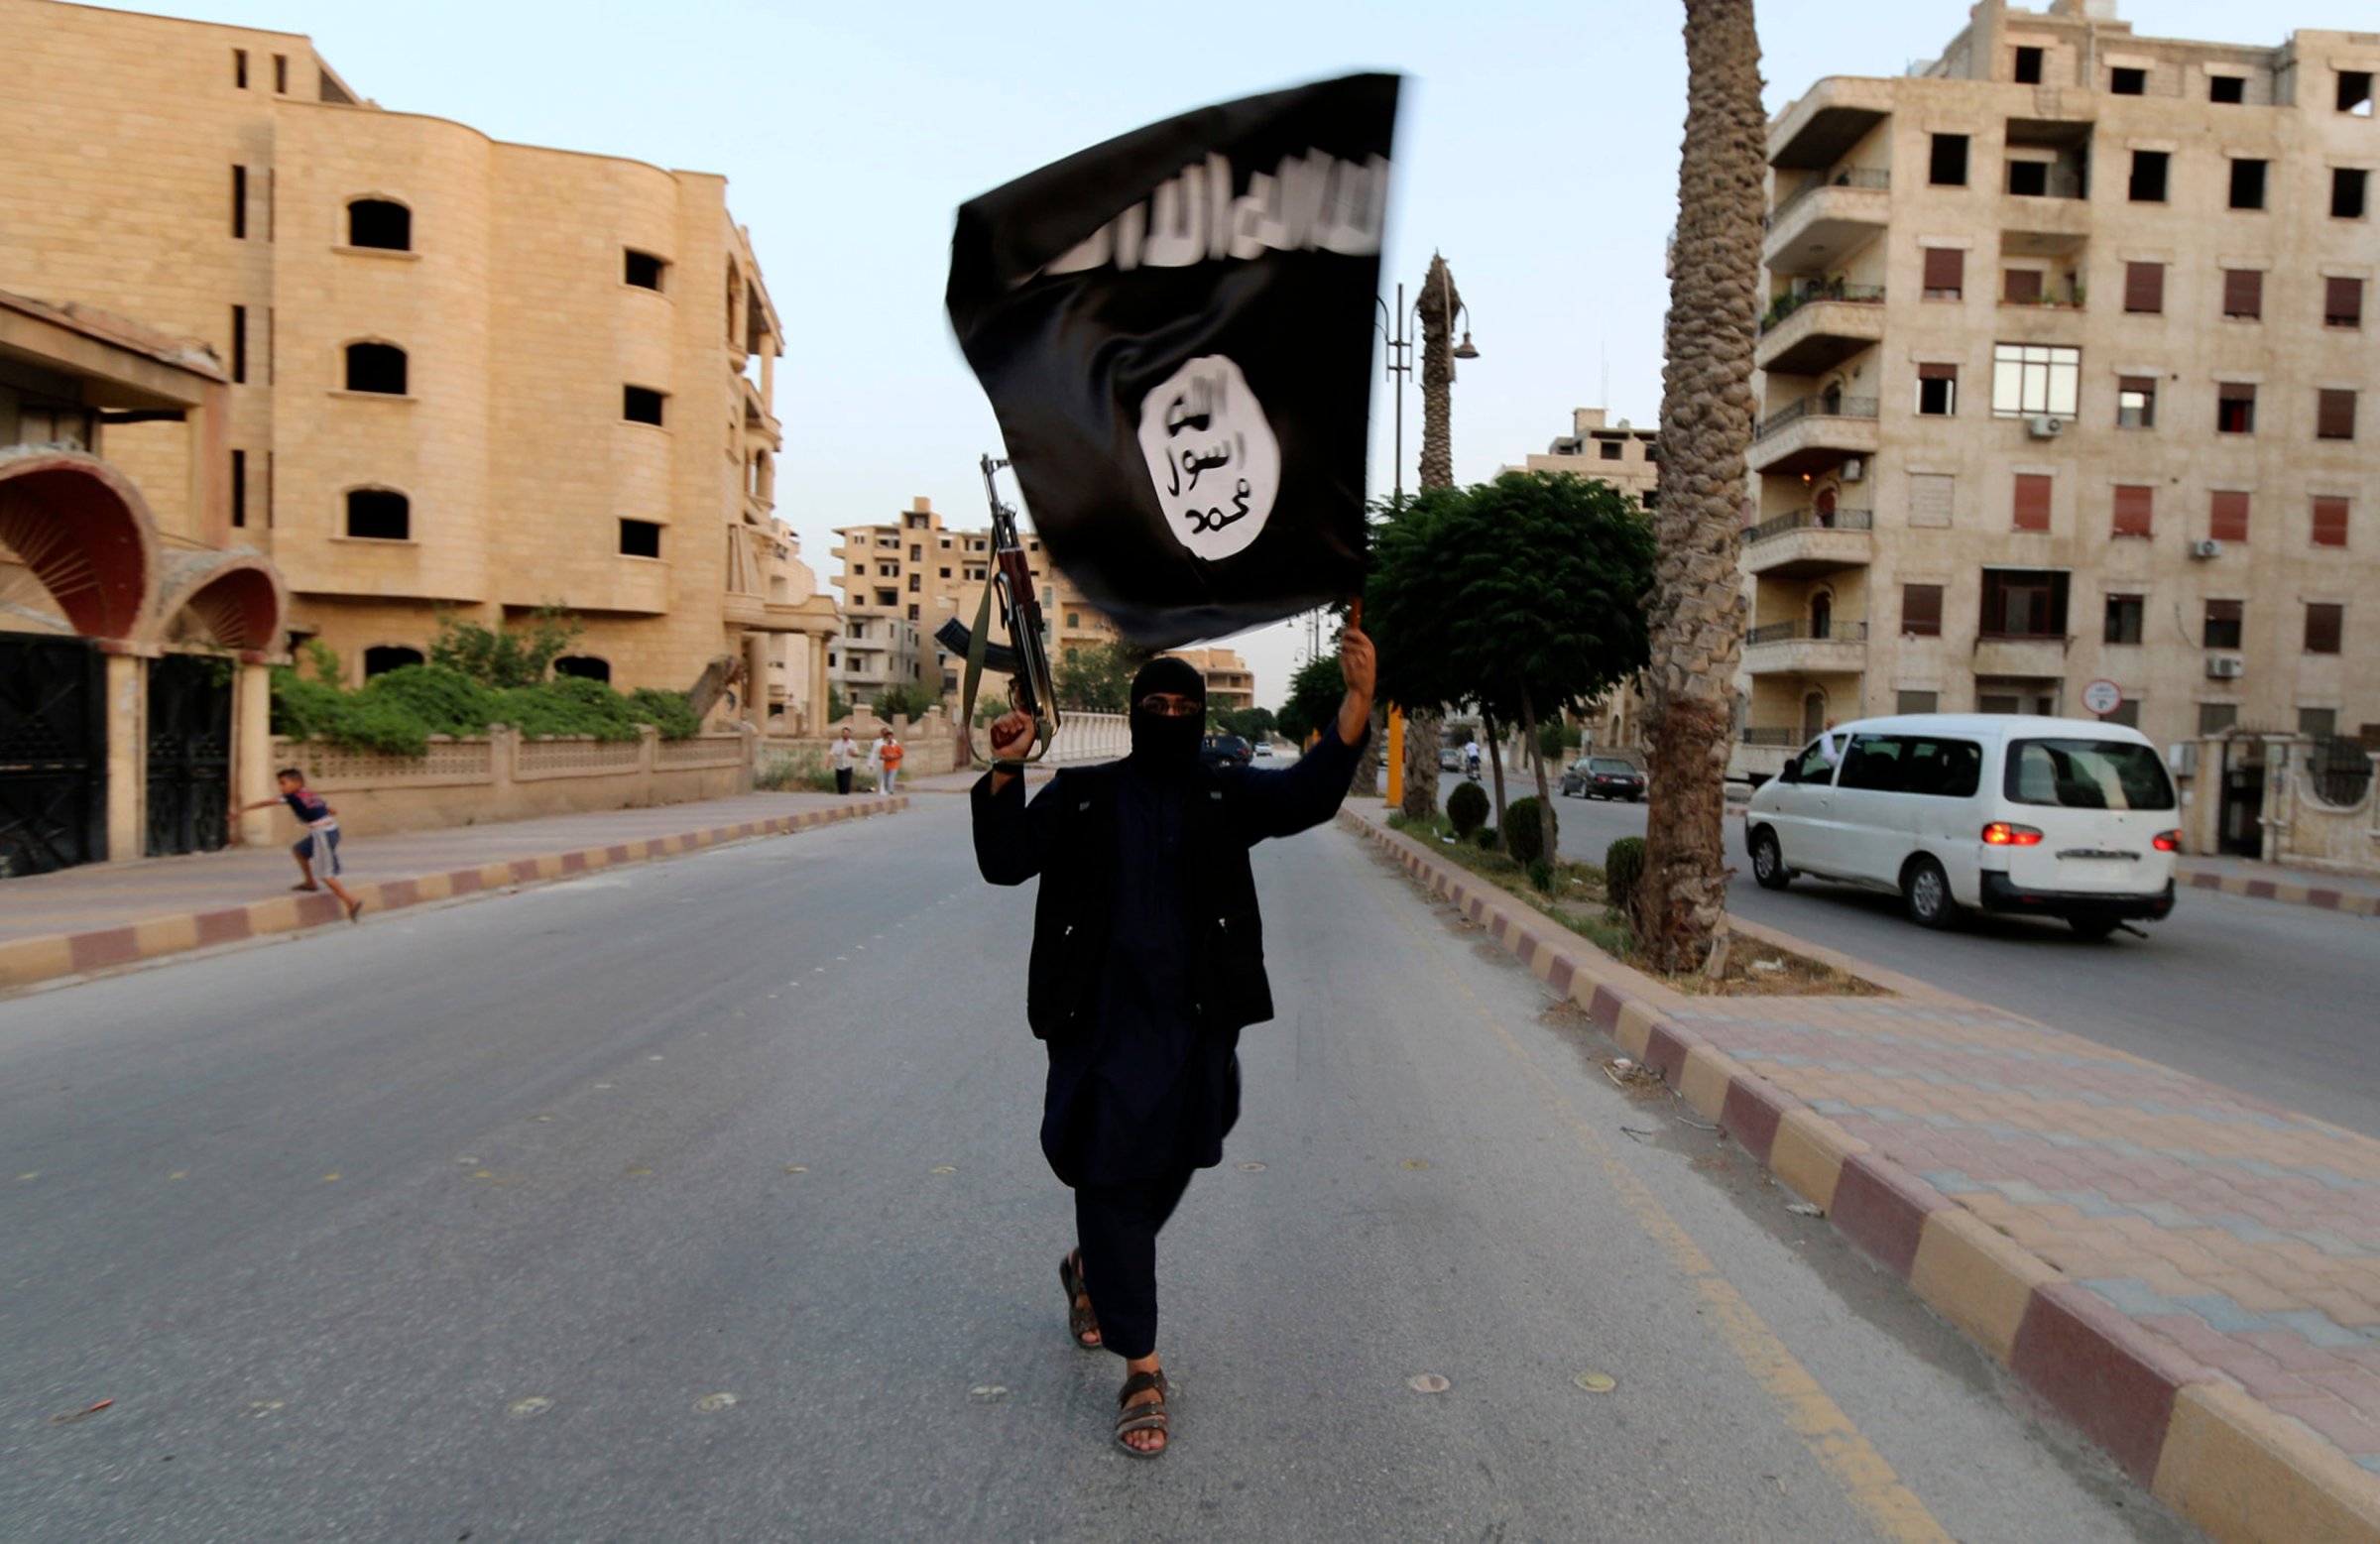 A member loyal to ISIS waves a flag in Raqqa, Syria June 29, 2014